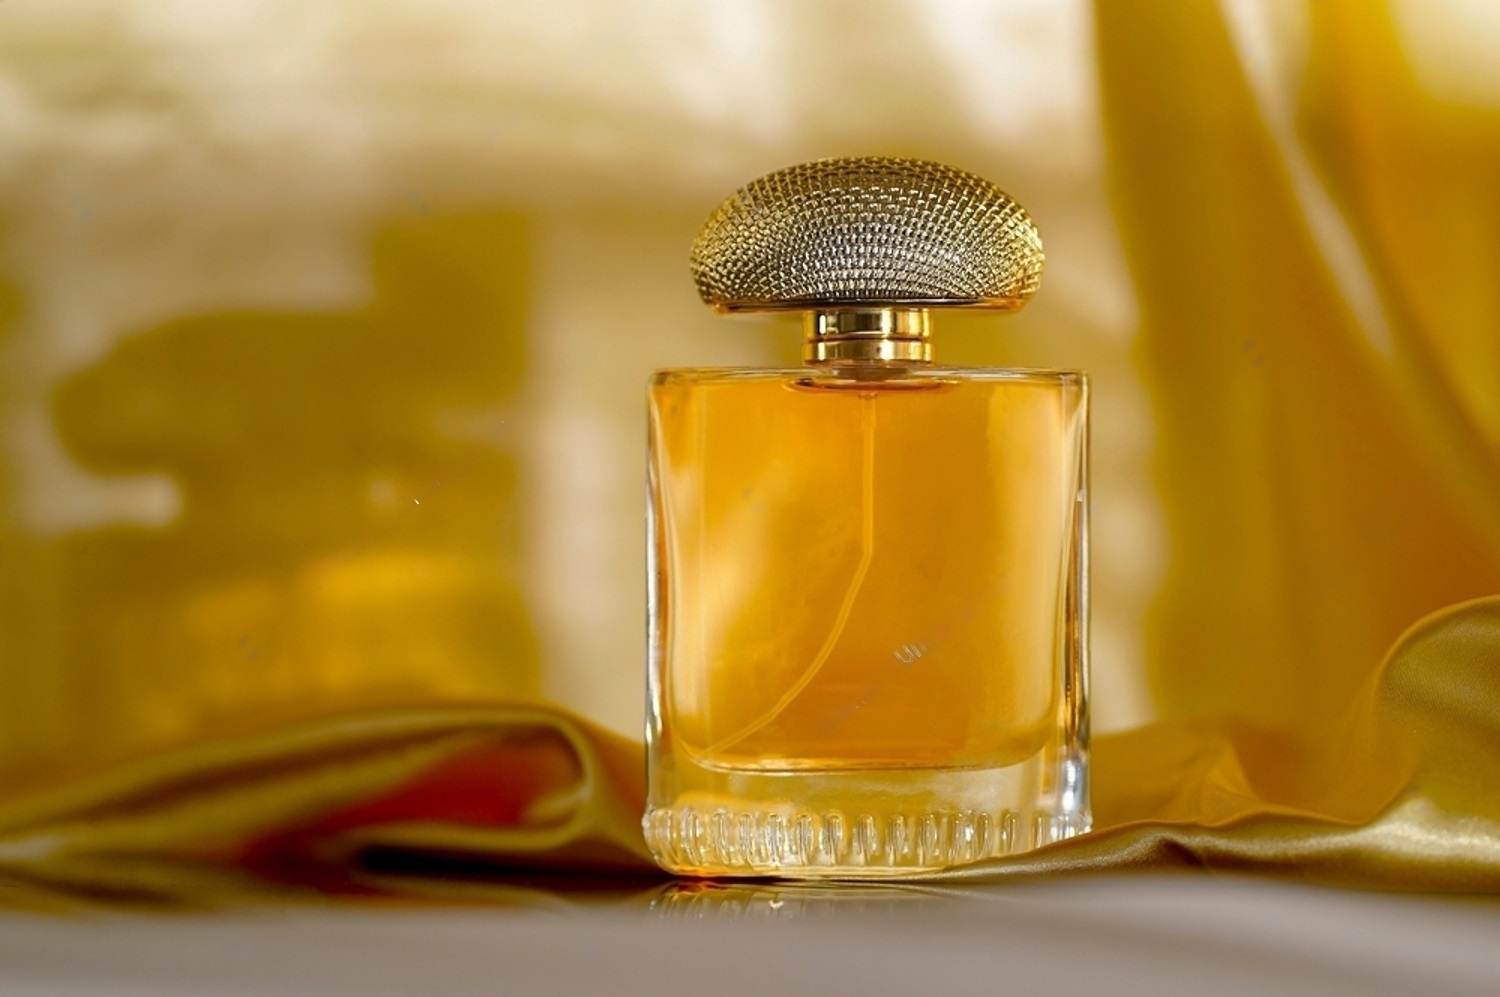 Choosing the Best: A Quick Overview of Oud Perfume for Men